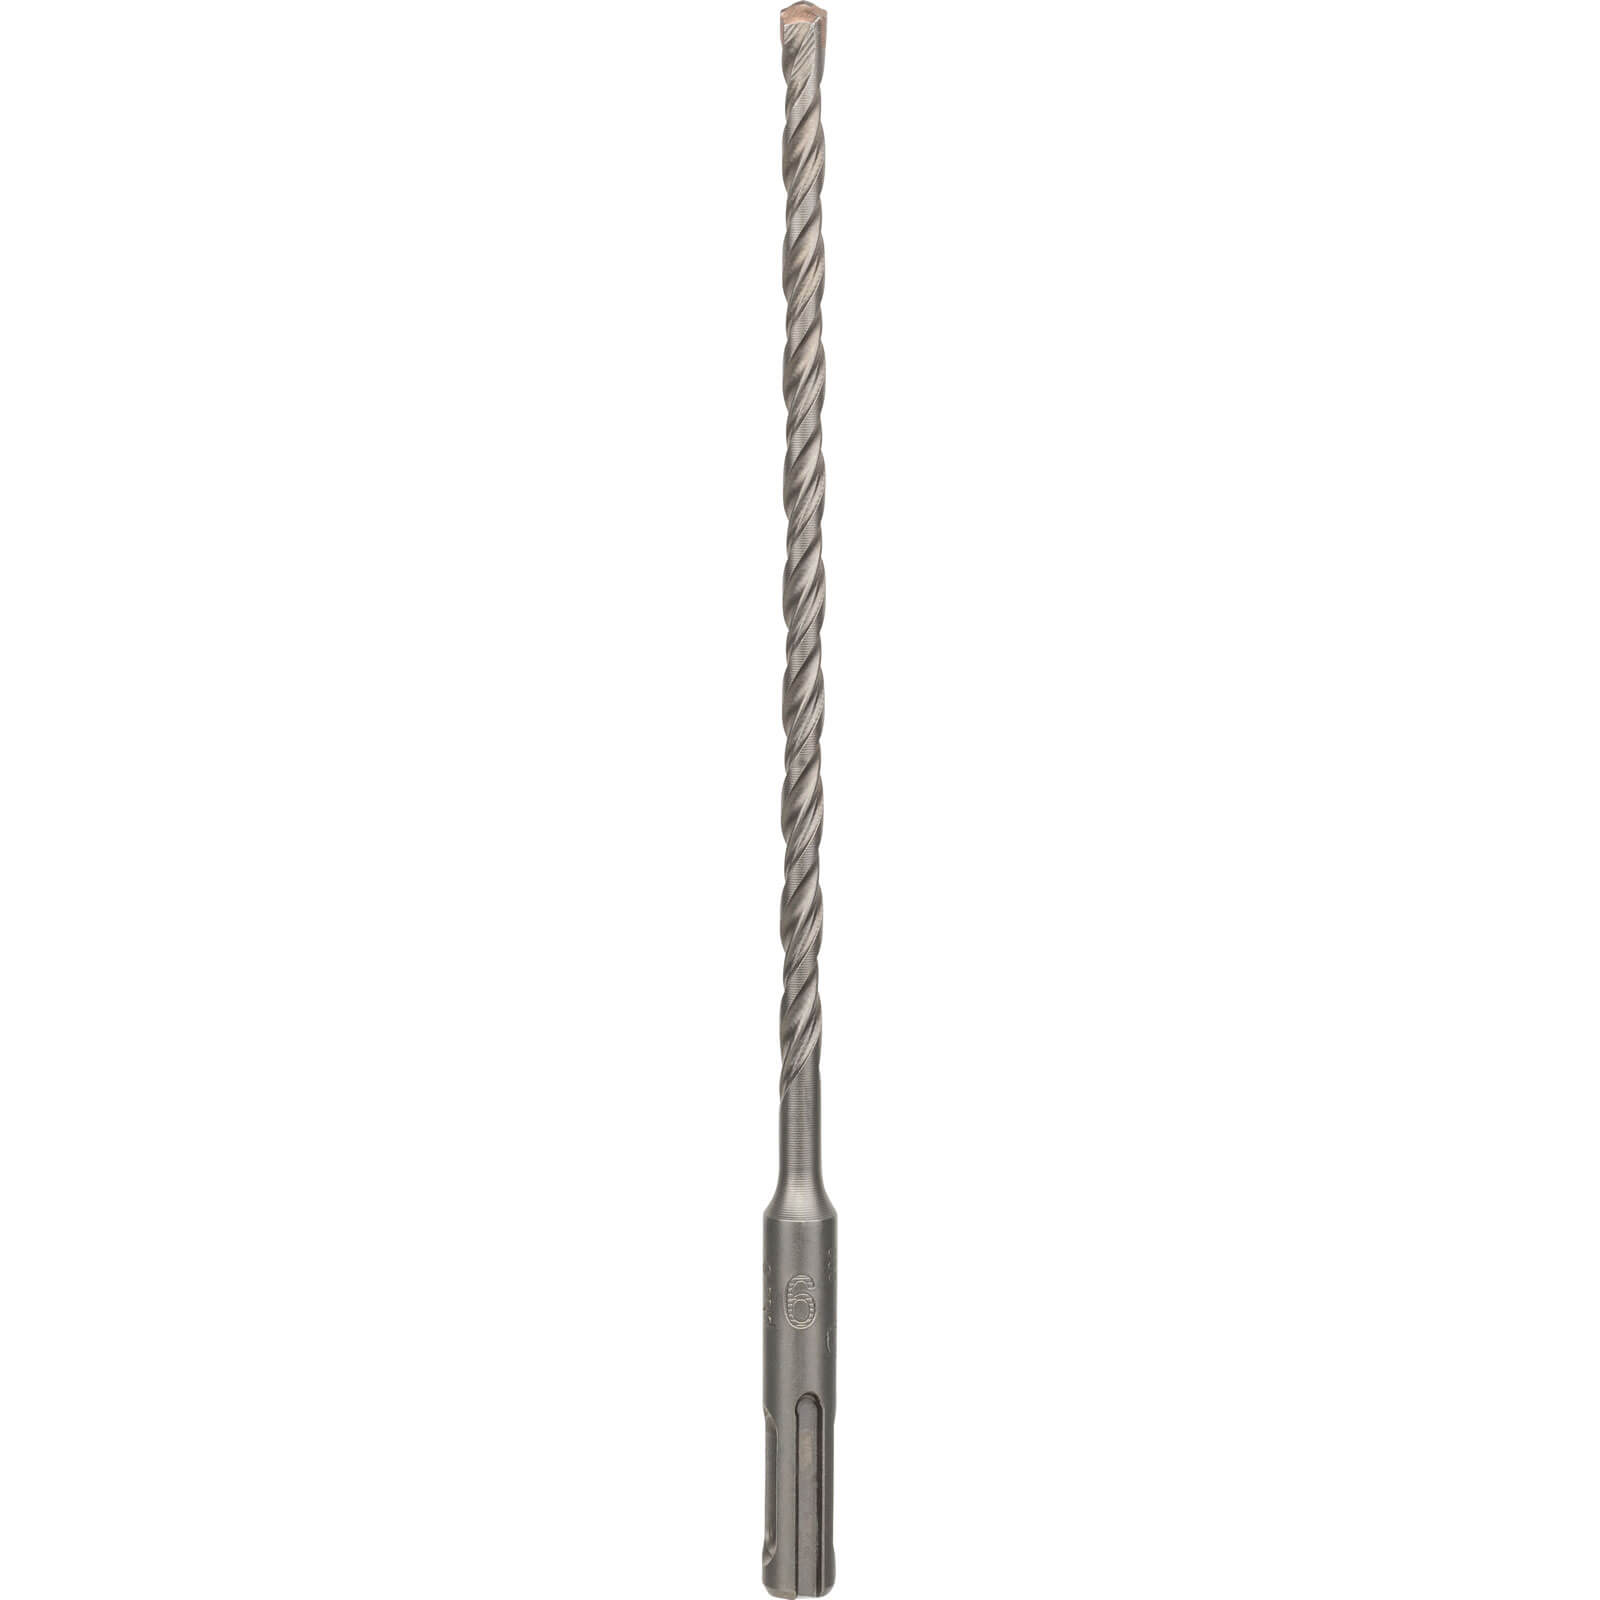 Image of Bosch Series 3 SDS Plus Masonry Drill Bit 6mm 210mm Pack of 1